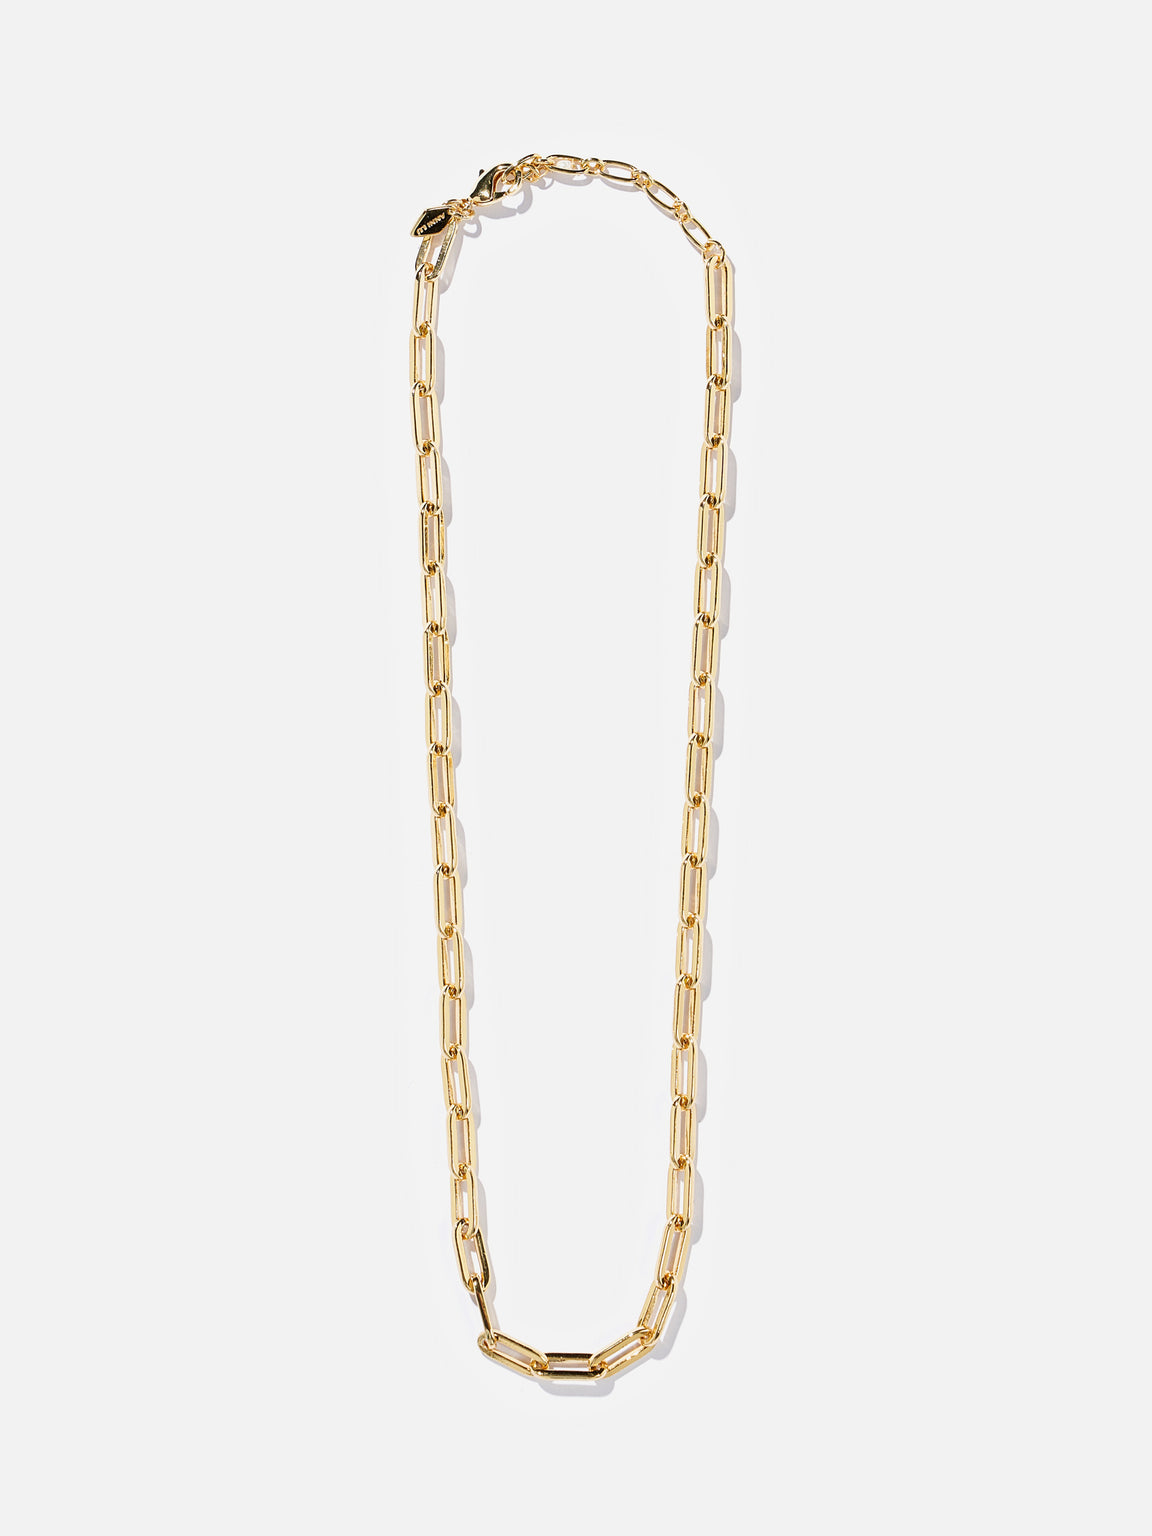 ANNI LU | GOLDEN HOUR NECKLACE GOLD